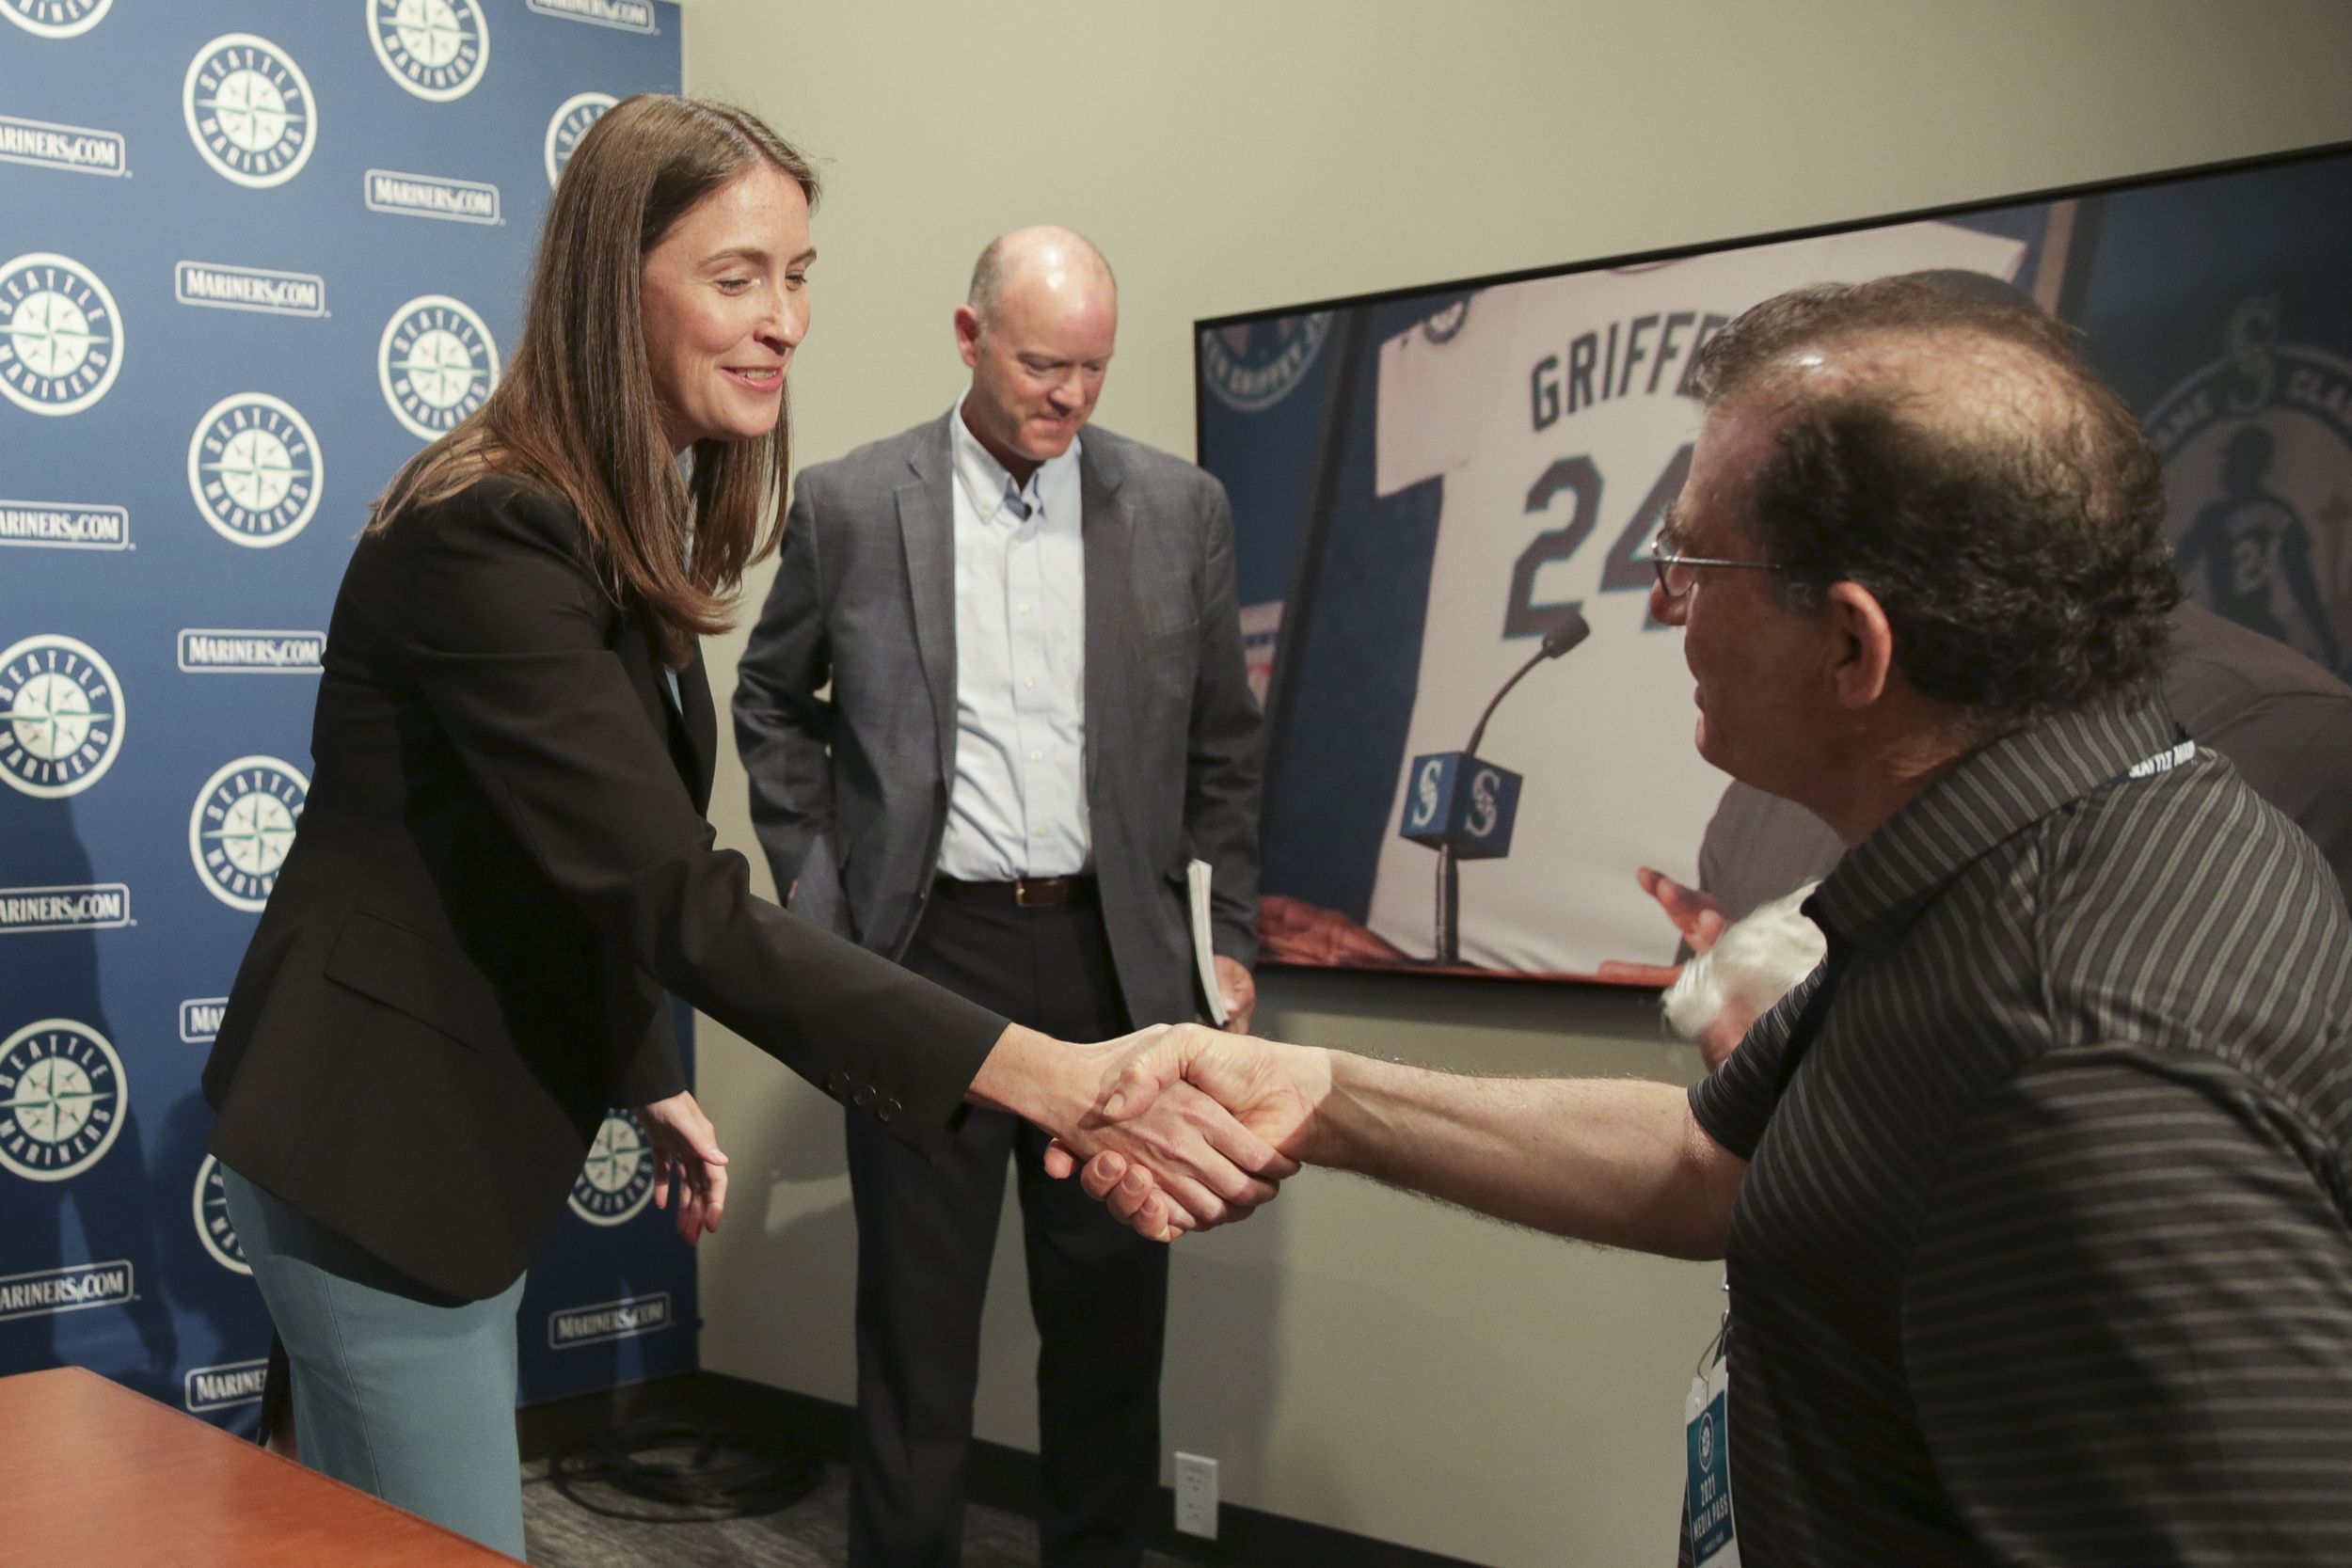 KUOW - Mariners' Catie Griggs says this is Seattle's year — and